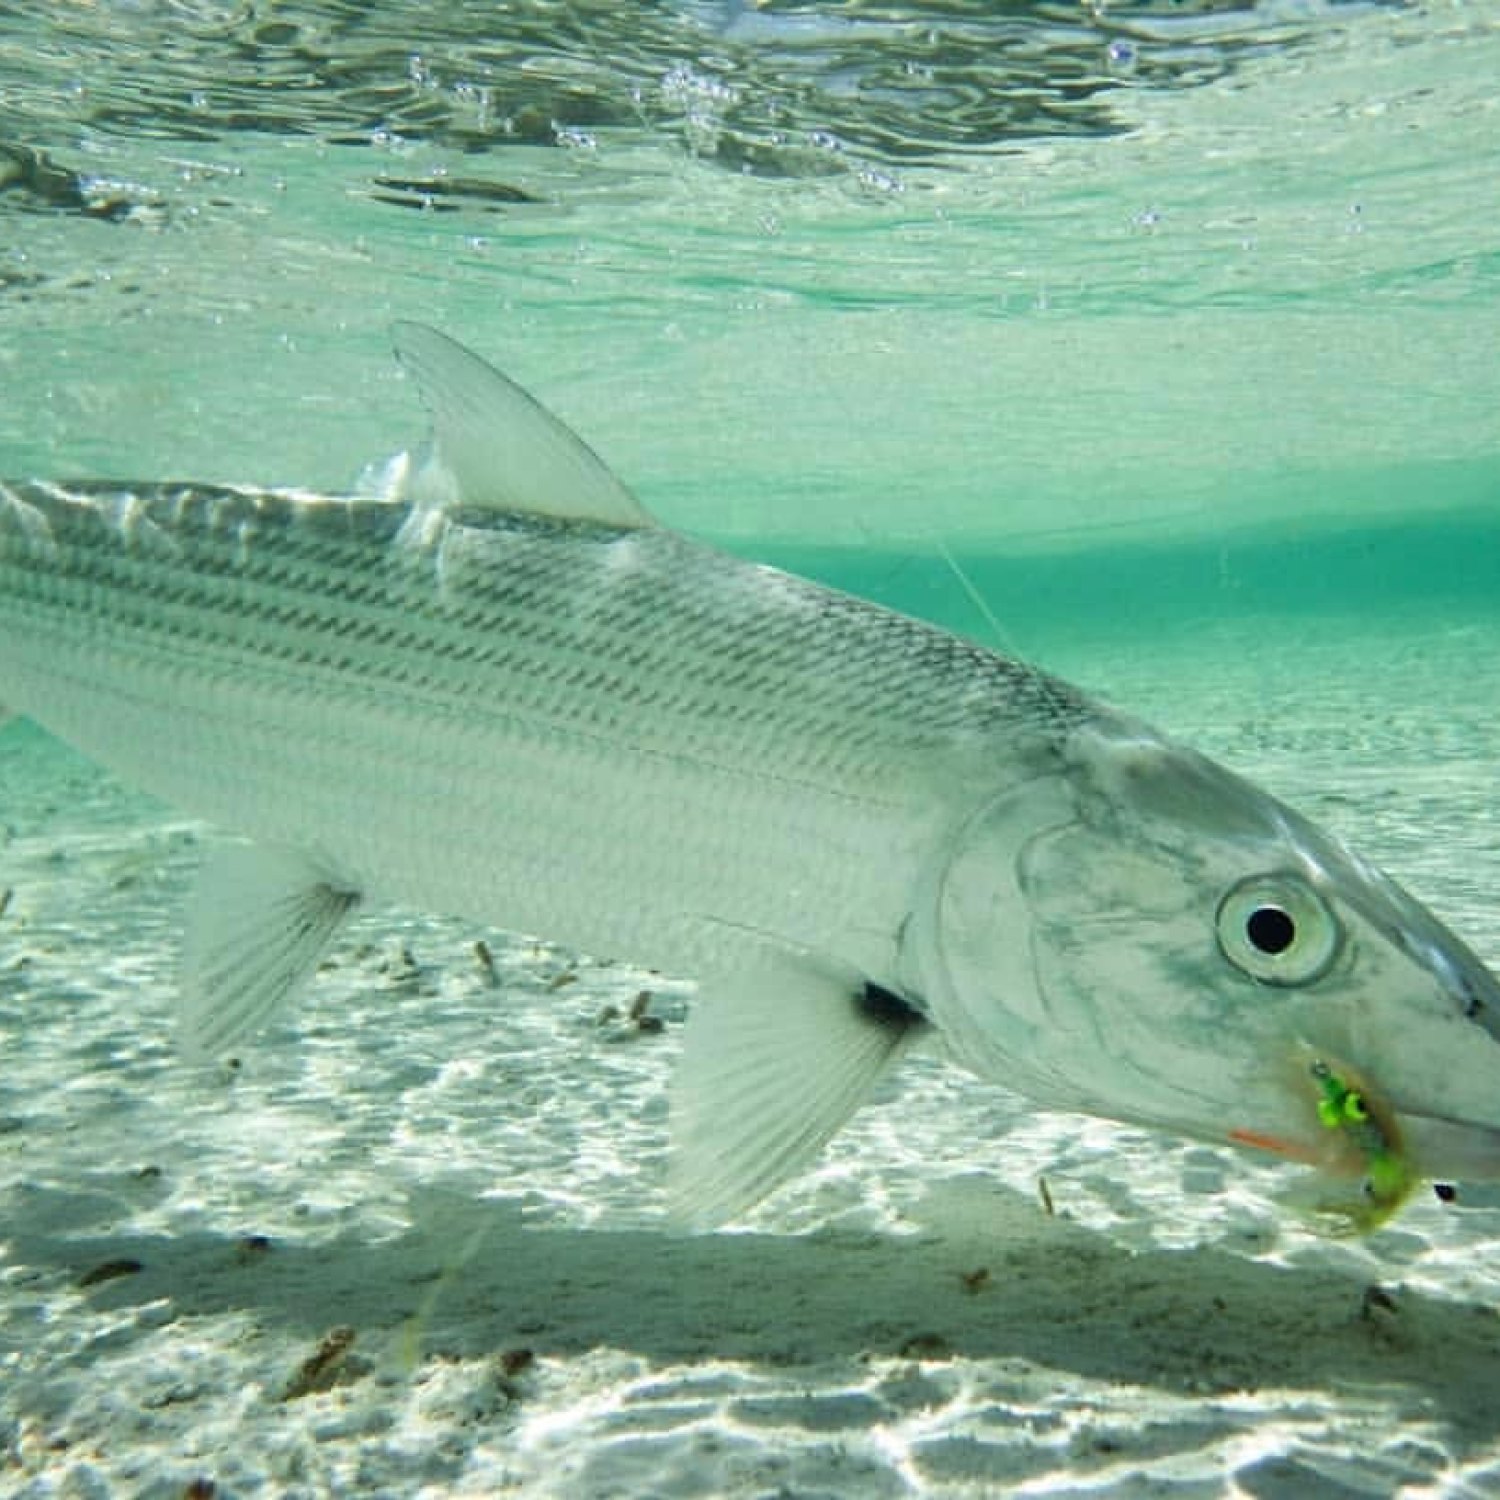 The Mysterious Bonefish: A Jewel of the Sea